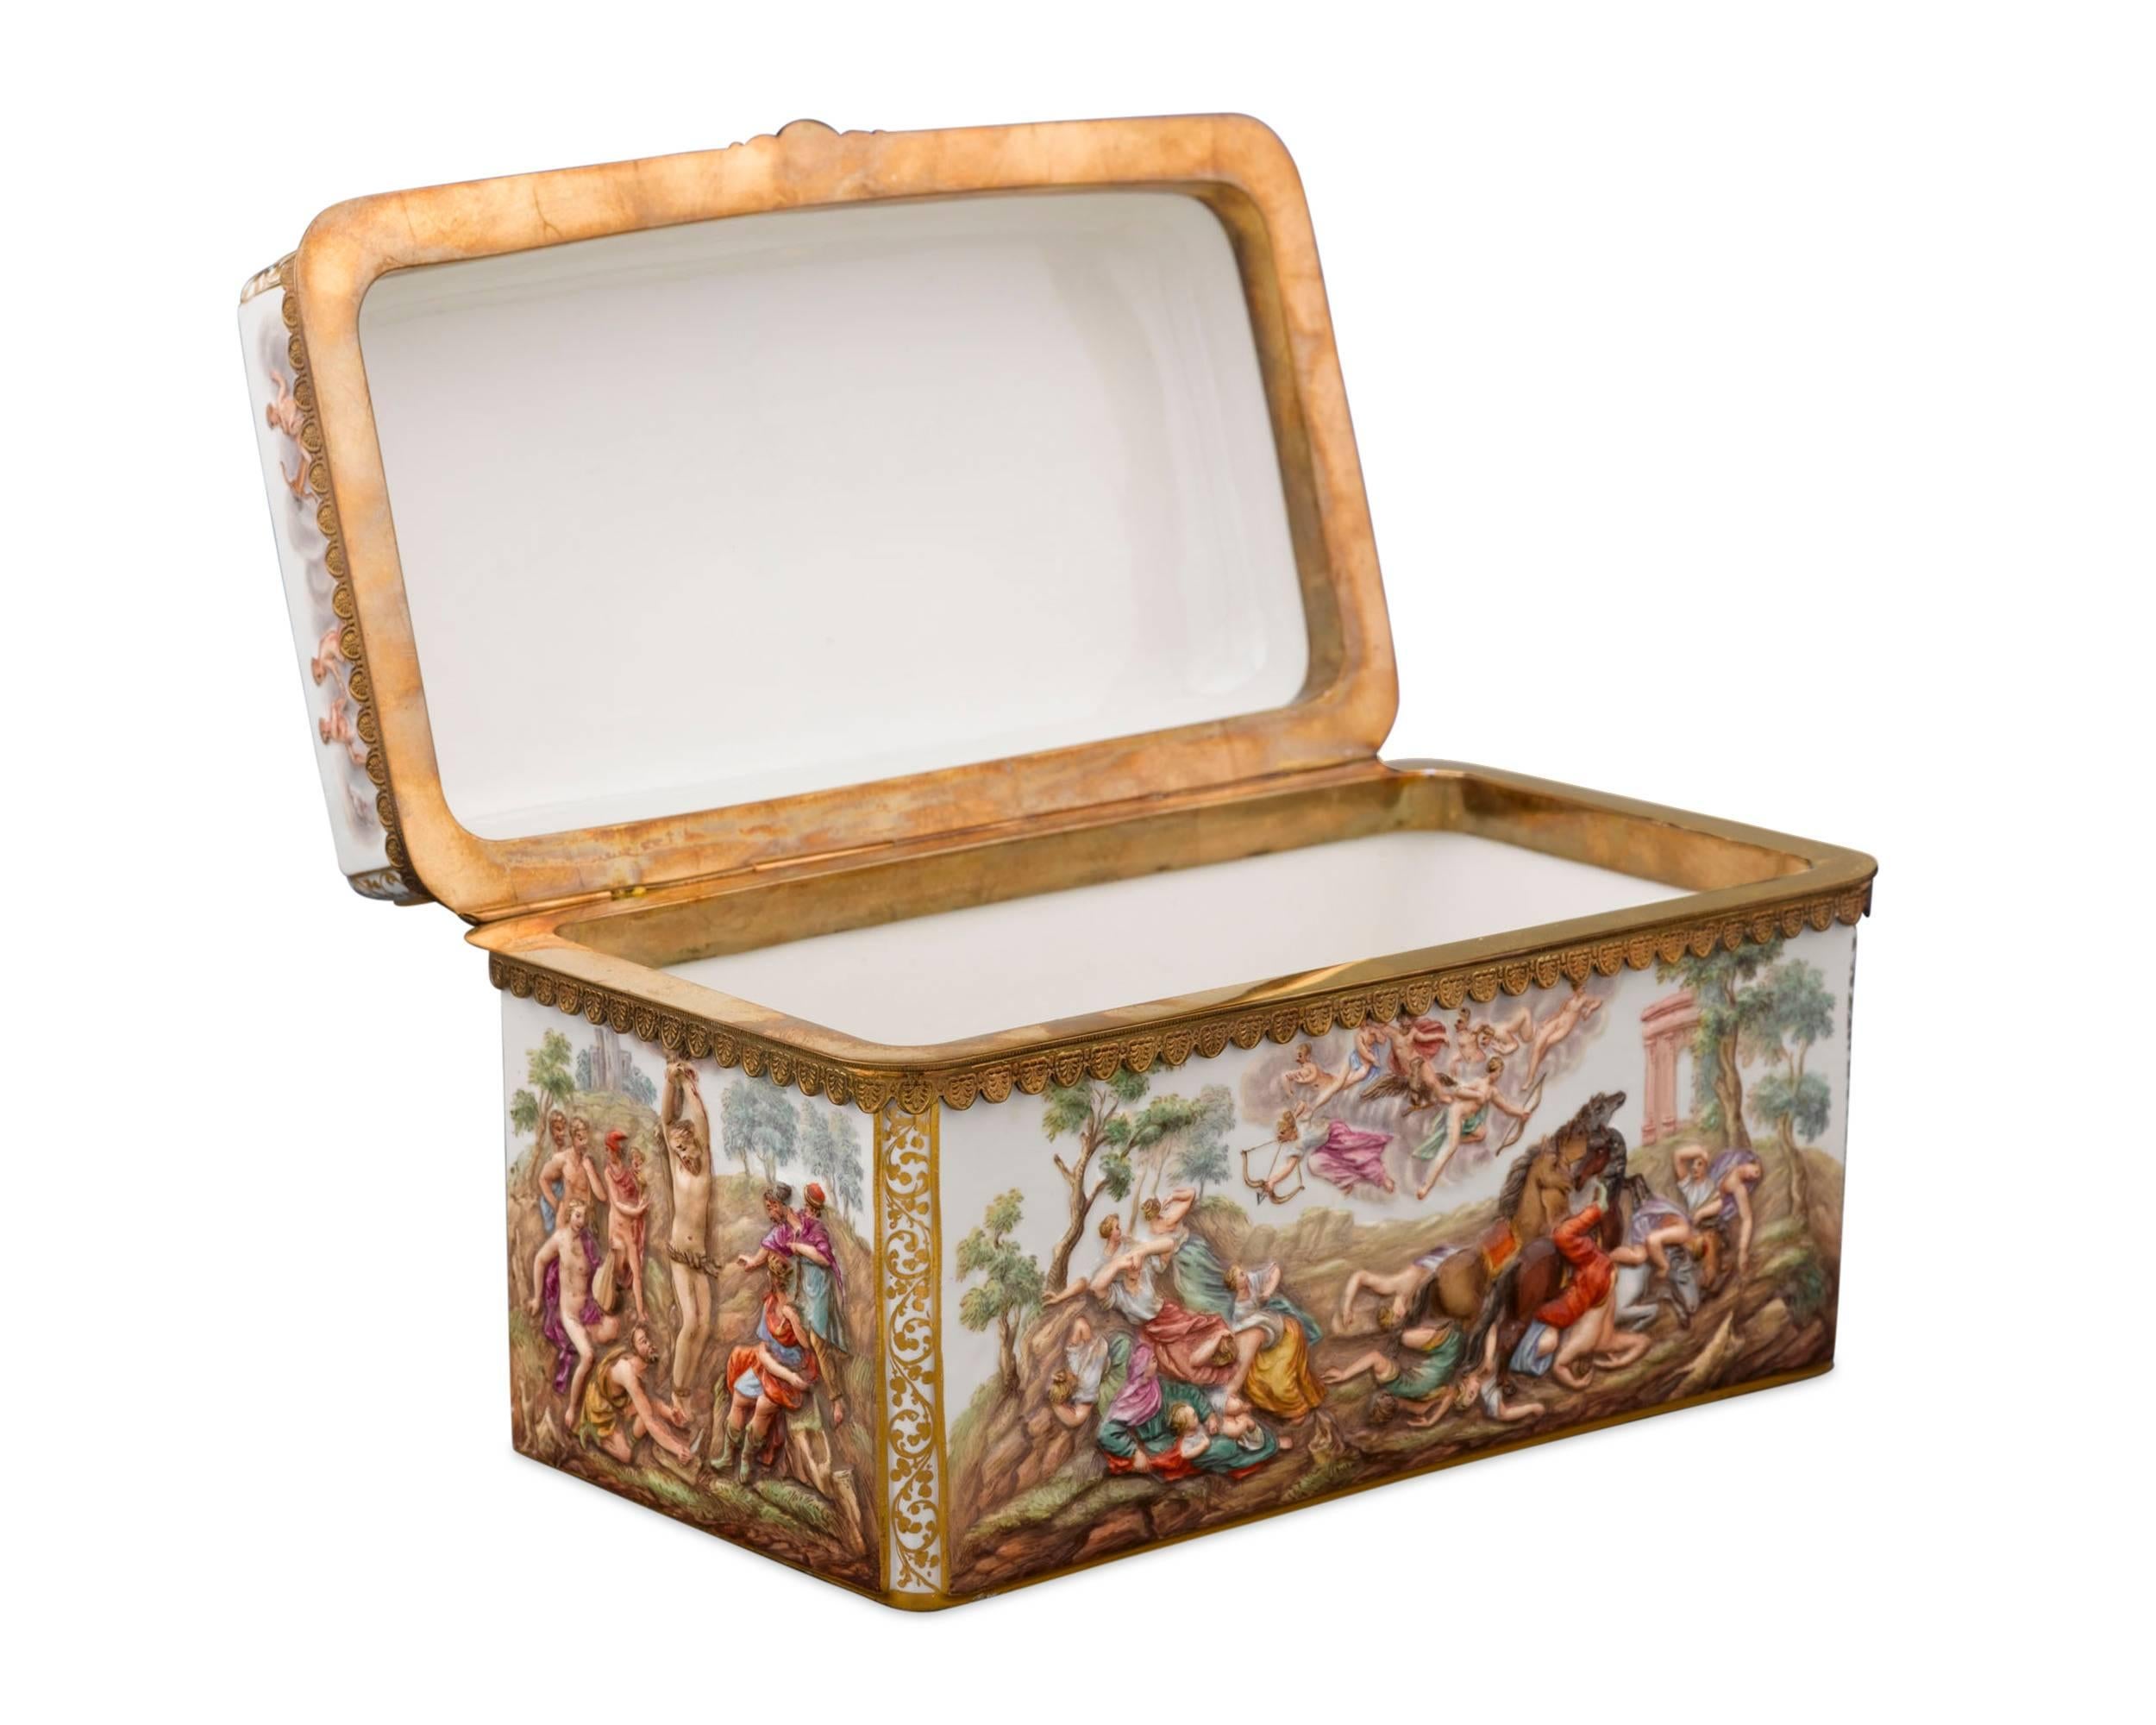 Incredible hand-painted bas-relief scenes cover this magnificent Meissen Porcelain casket. Displaying a furious battle, bathers and torture, all witnessed, and possibly influenced, by hovering gods, this casket is a celebration of classical design